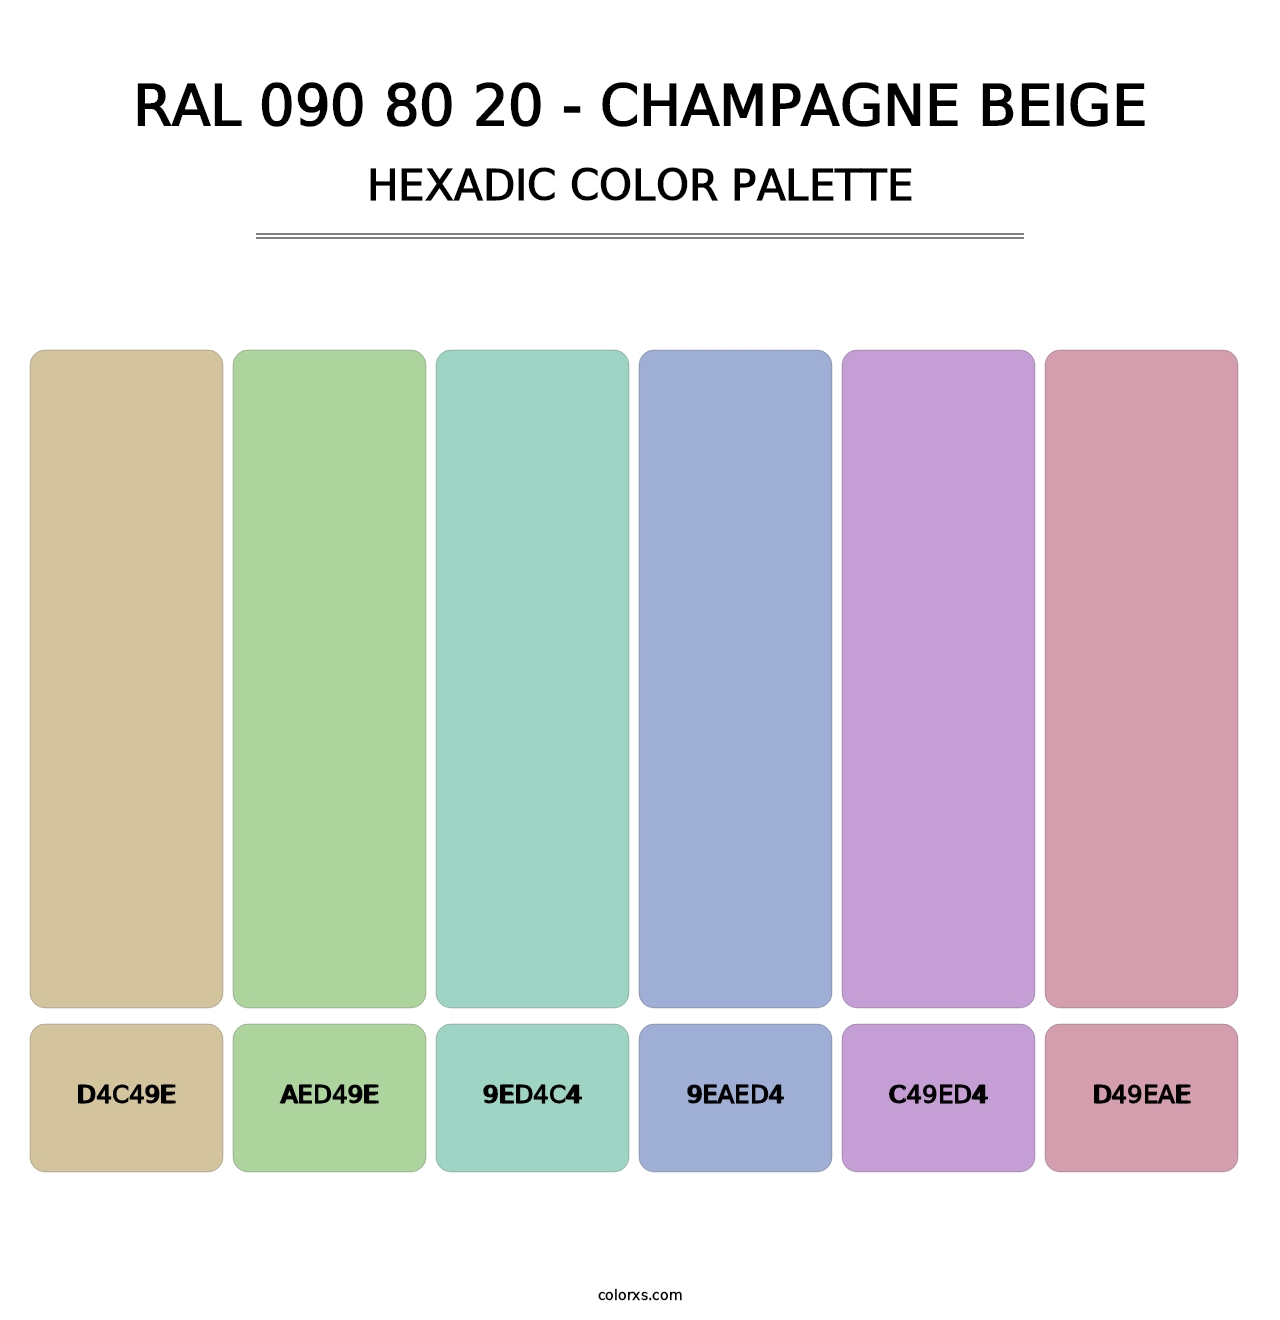 RAL 090 80 20 - Champagne Beige - Hexadic Color Palette